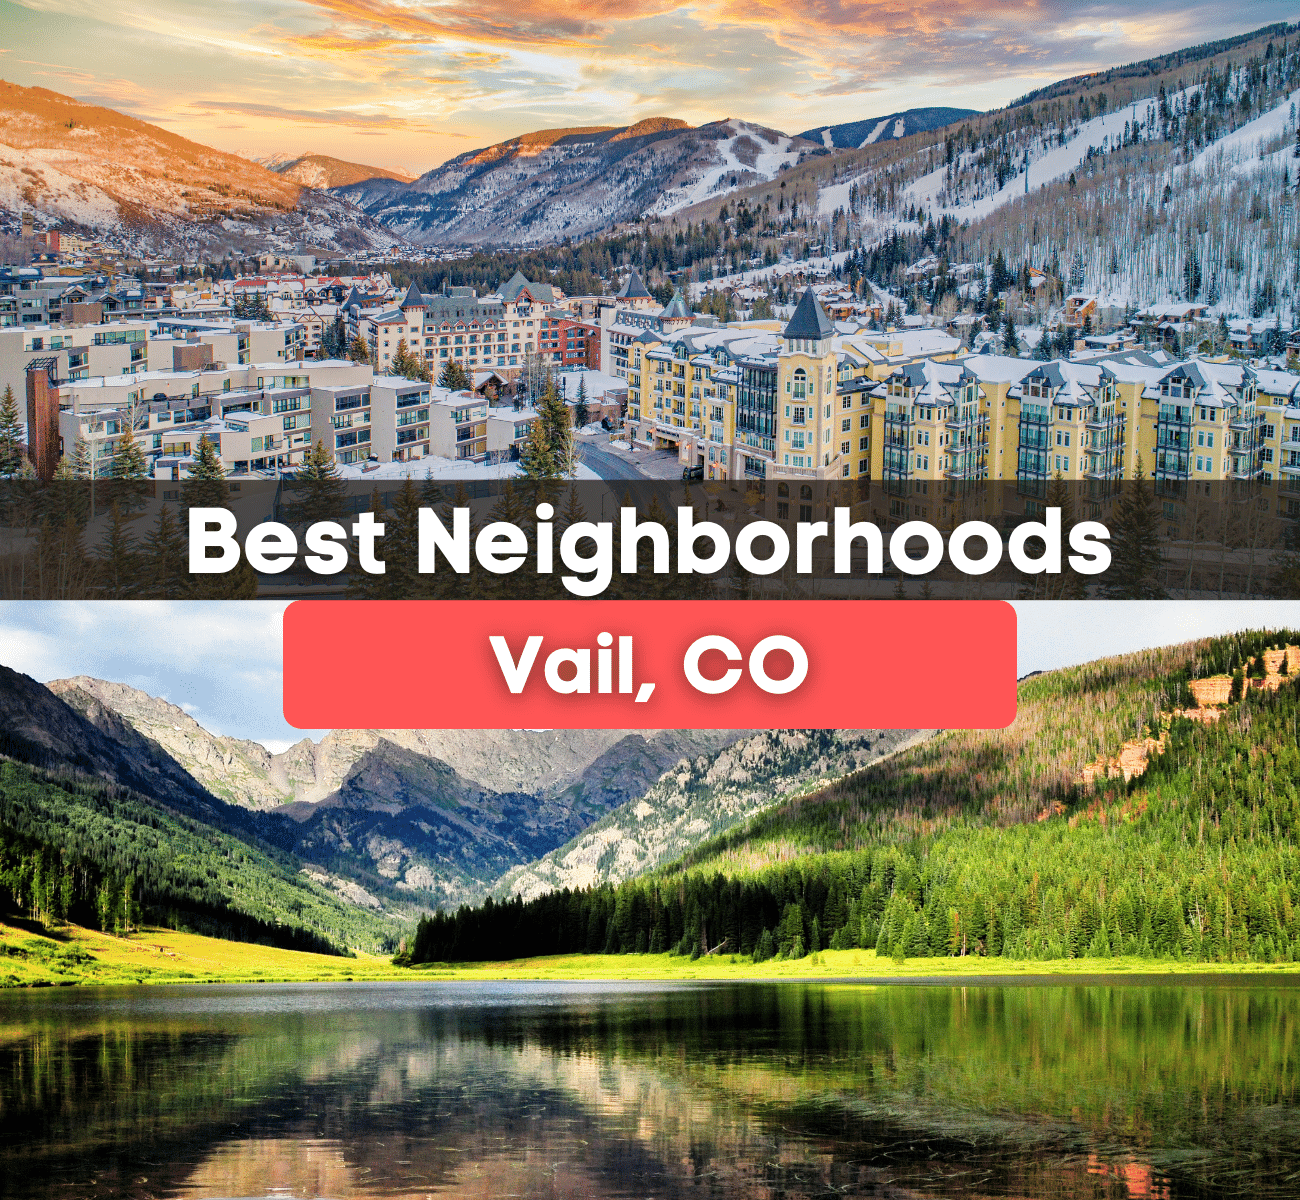 The best places to live in Vail, CO - best neighborhoods!